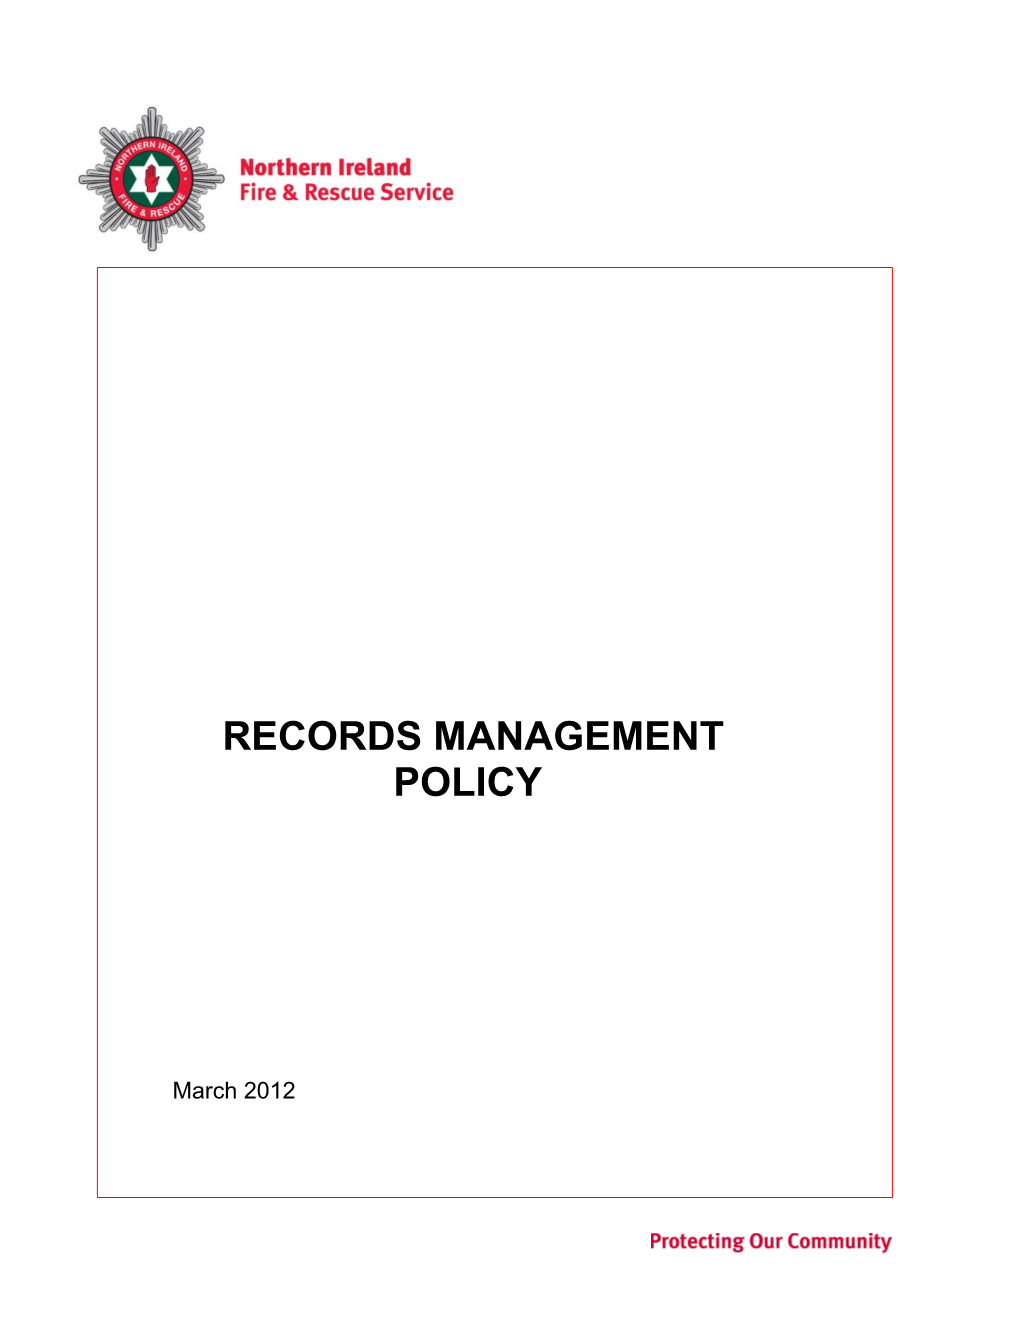 Records Management Policy Statement